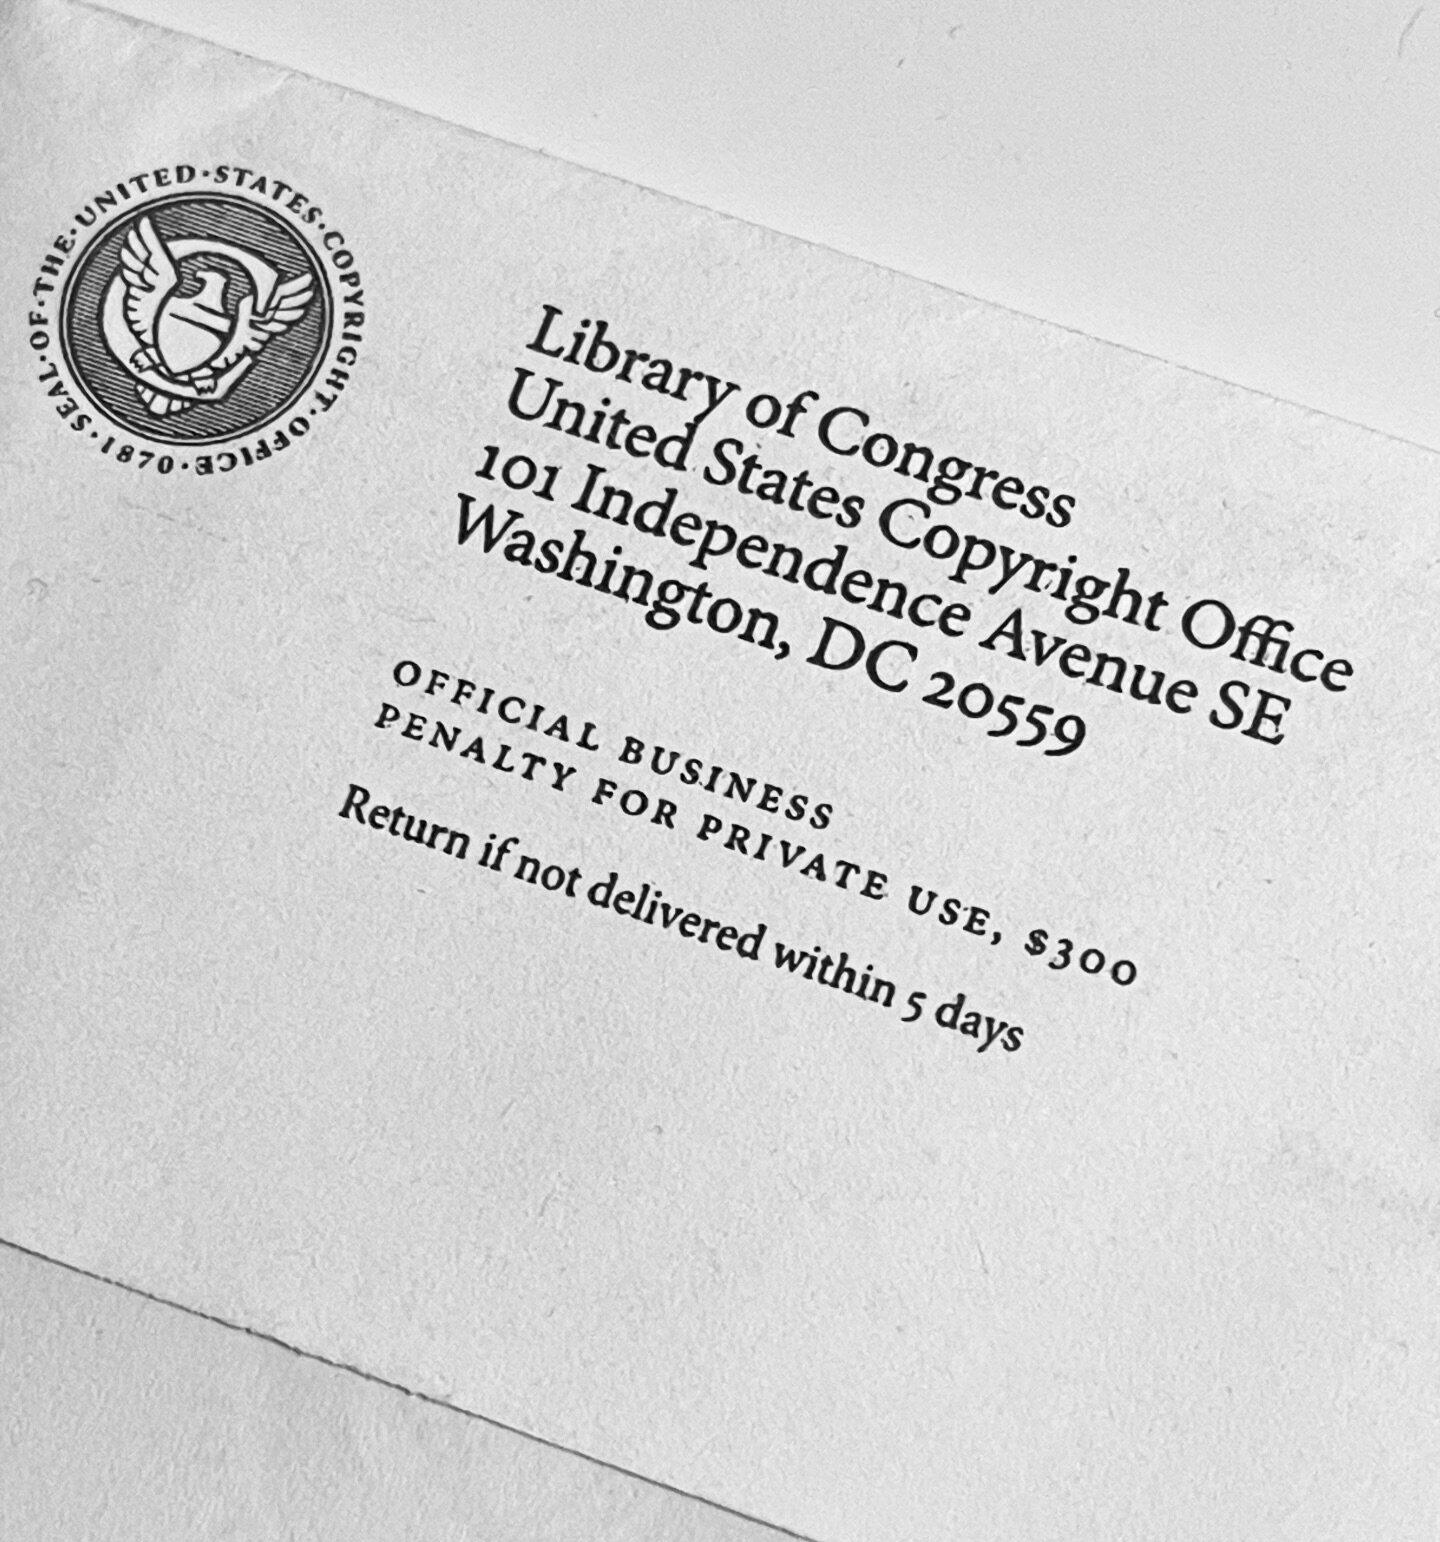 What an amazing feeling it was to get this in the mail yesterday!! The copyright registration for my &ldquo;Reflections of Tomorrow&rdquo; album! Thank you Library of Congress!